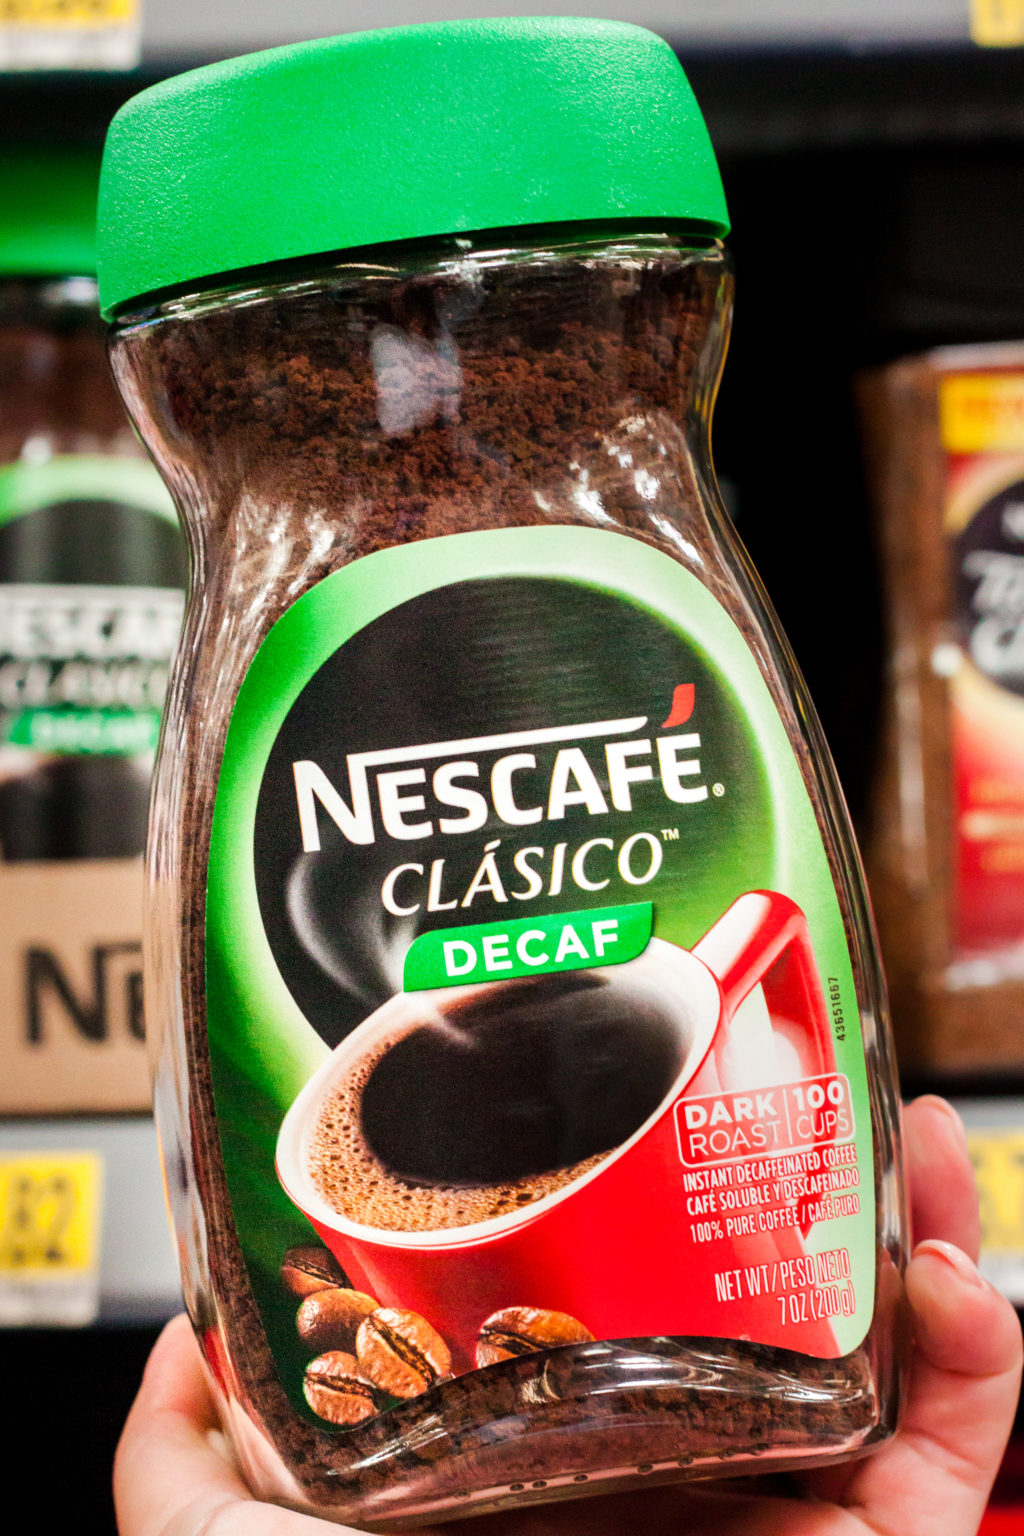 Holding NESCAFE CLASICO in the coffee aisle.